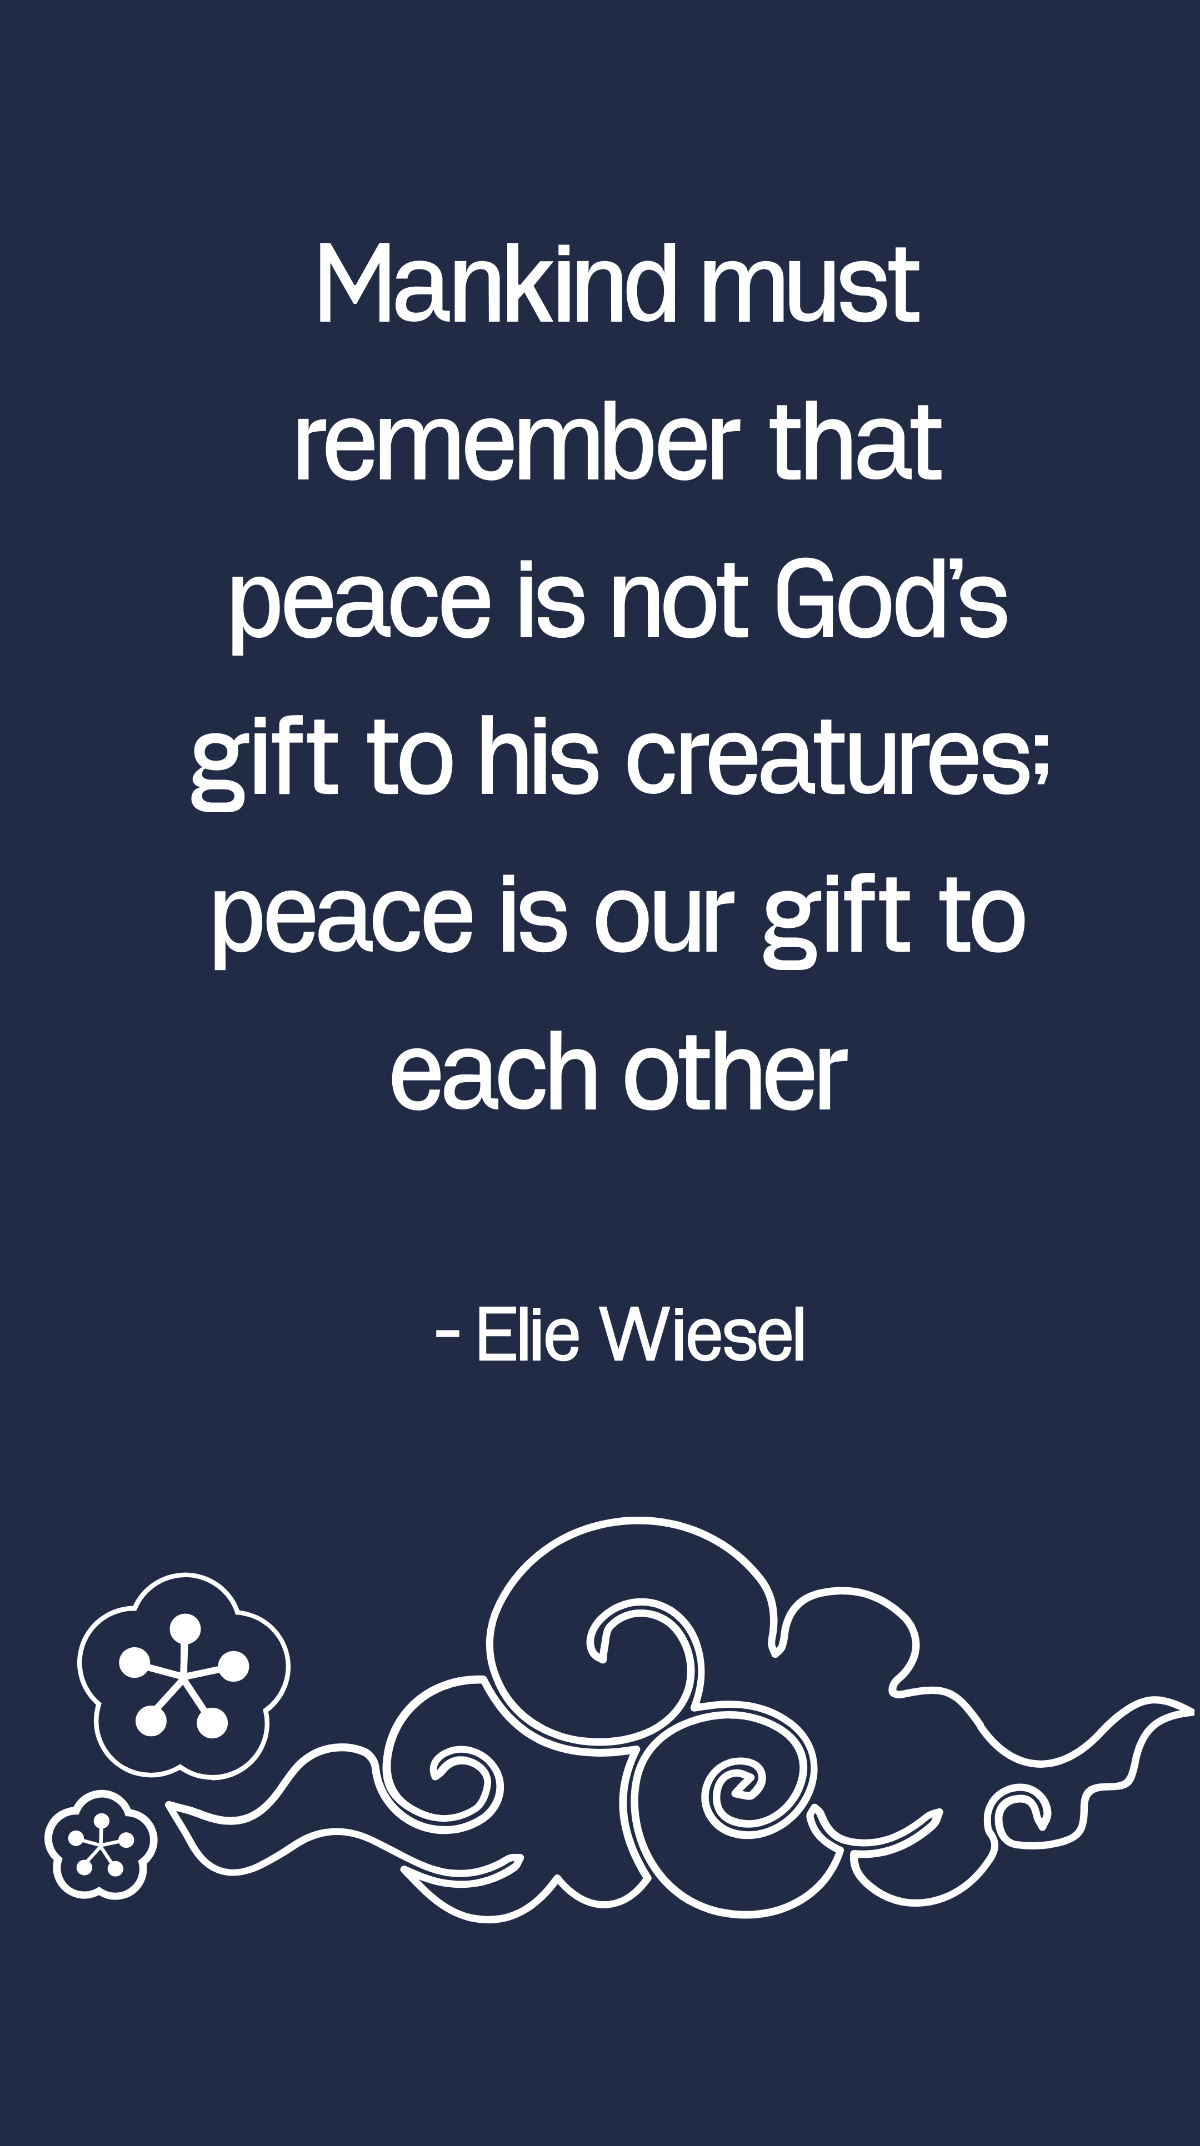 Free Elie Wiesel - Mankind must remember that peace is not God's gift to his creatures; peace is our gift to each other Template